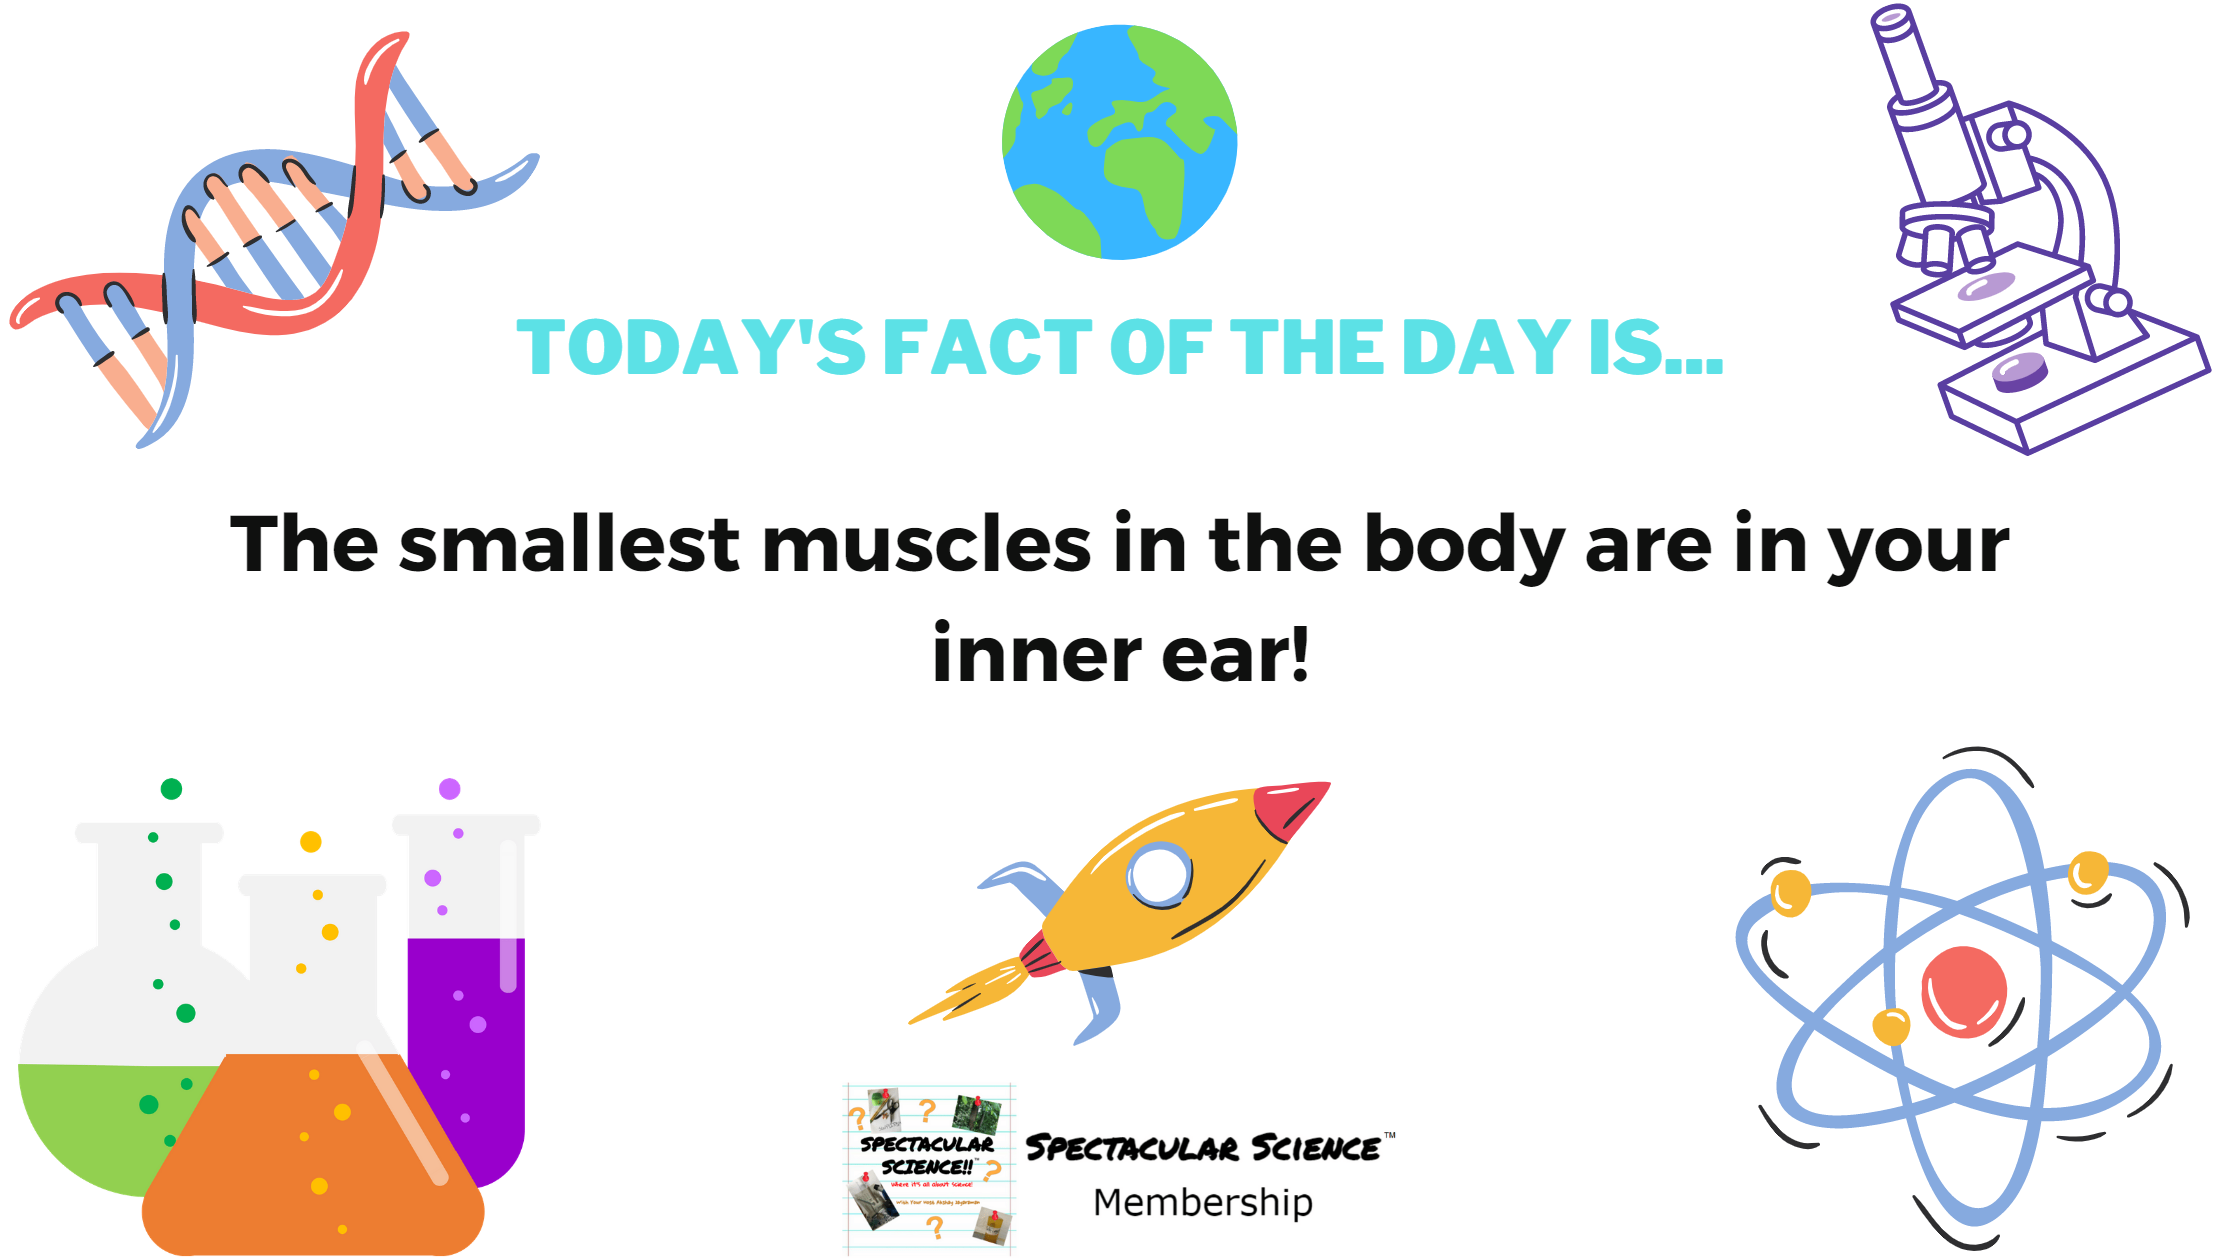 Fact of the Day Image February 17th